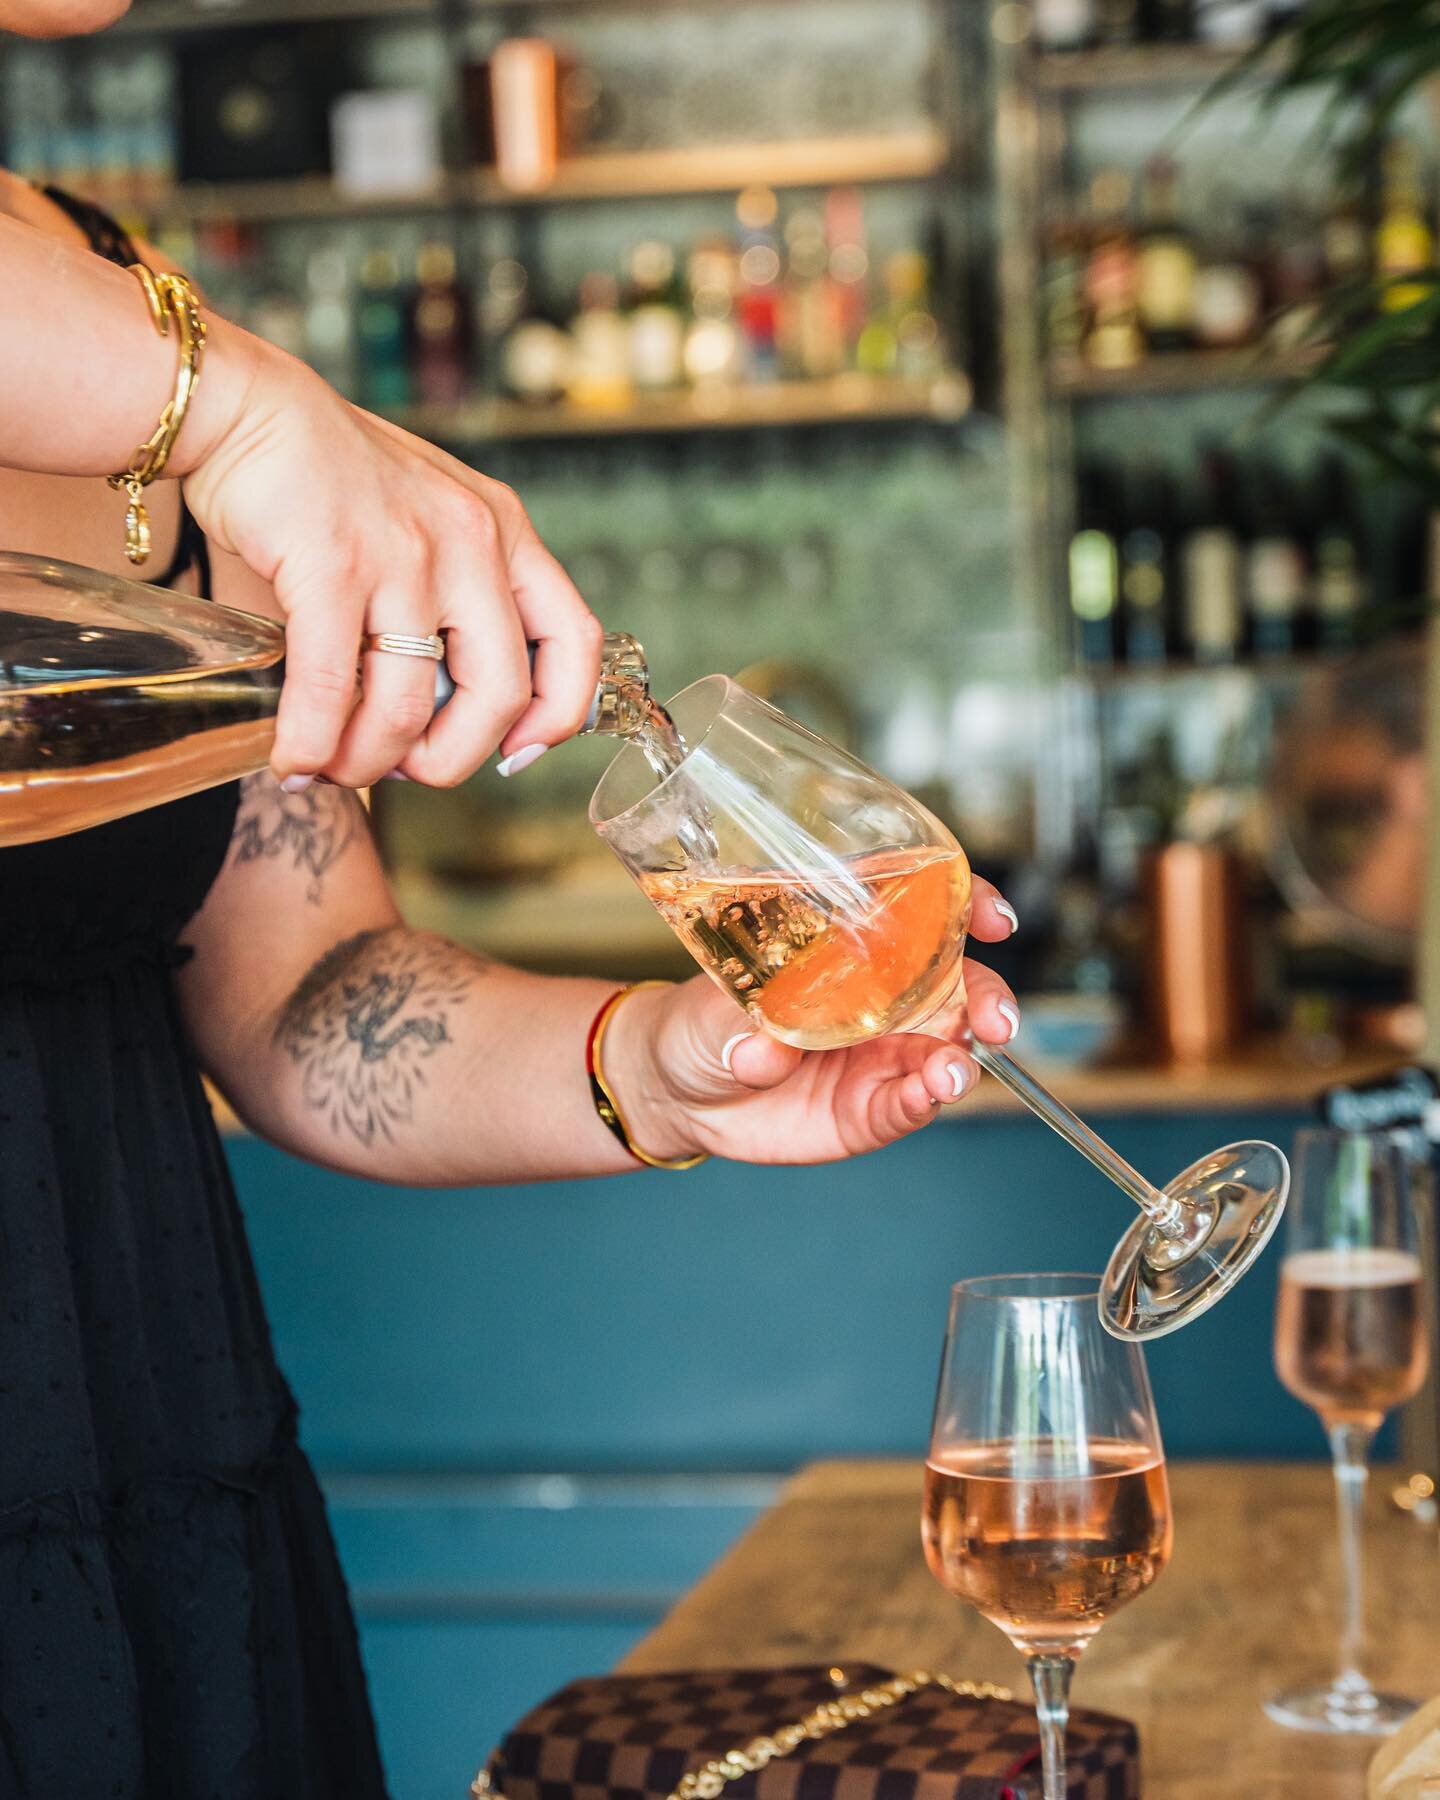 Nothing better than an after work wine! 🍷

We are open all day for refreshing drinks, yummy nibbles and golden hour ☀️

See you at the bar! 

#nicholasjames #winelover #ashleycross #bar #cocktailbar #happyhour #goldenhour